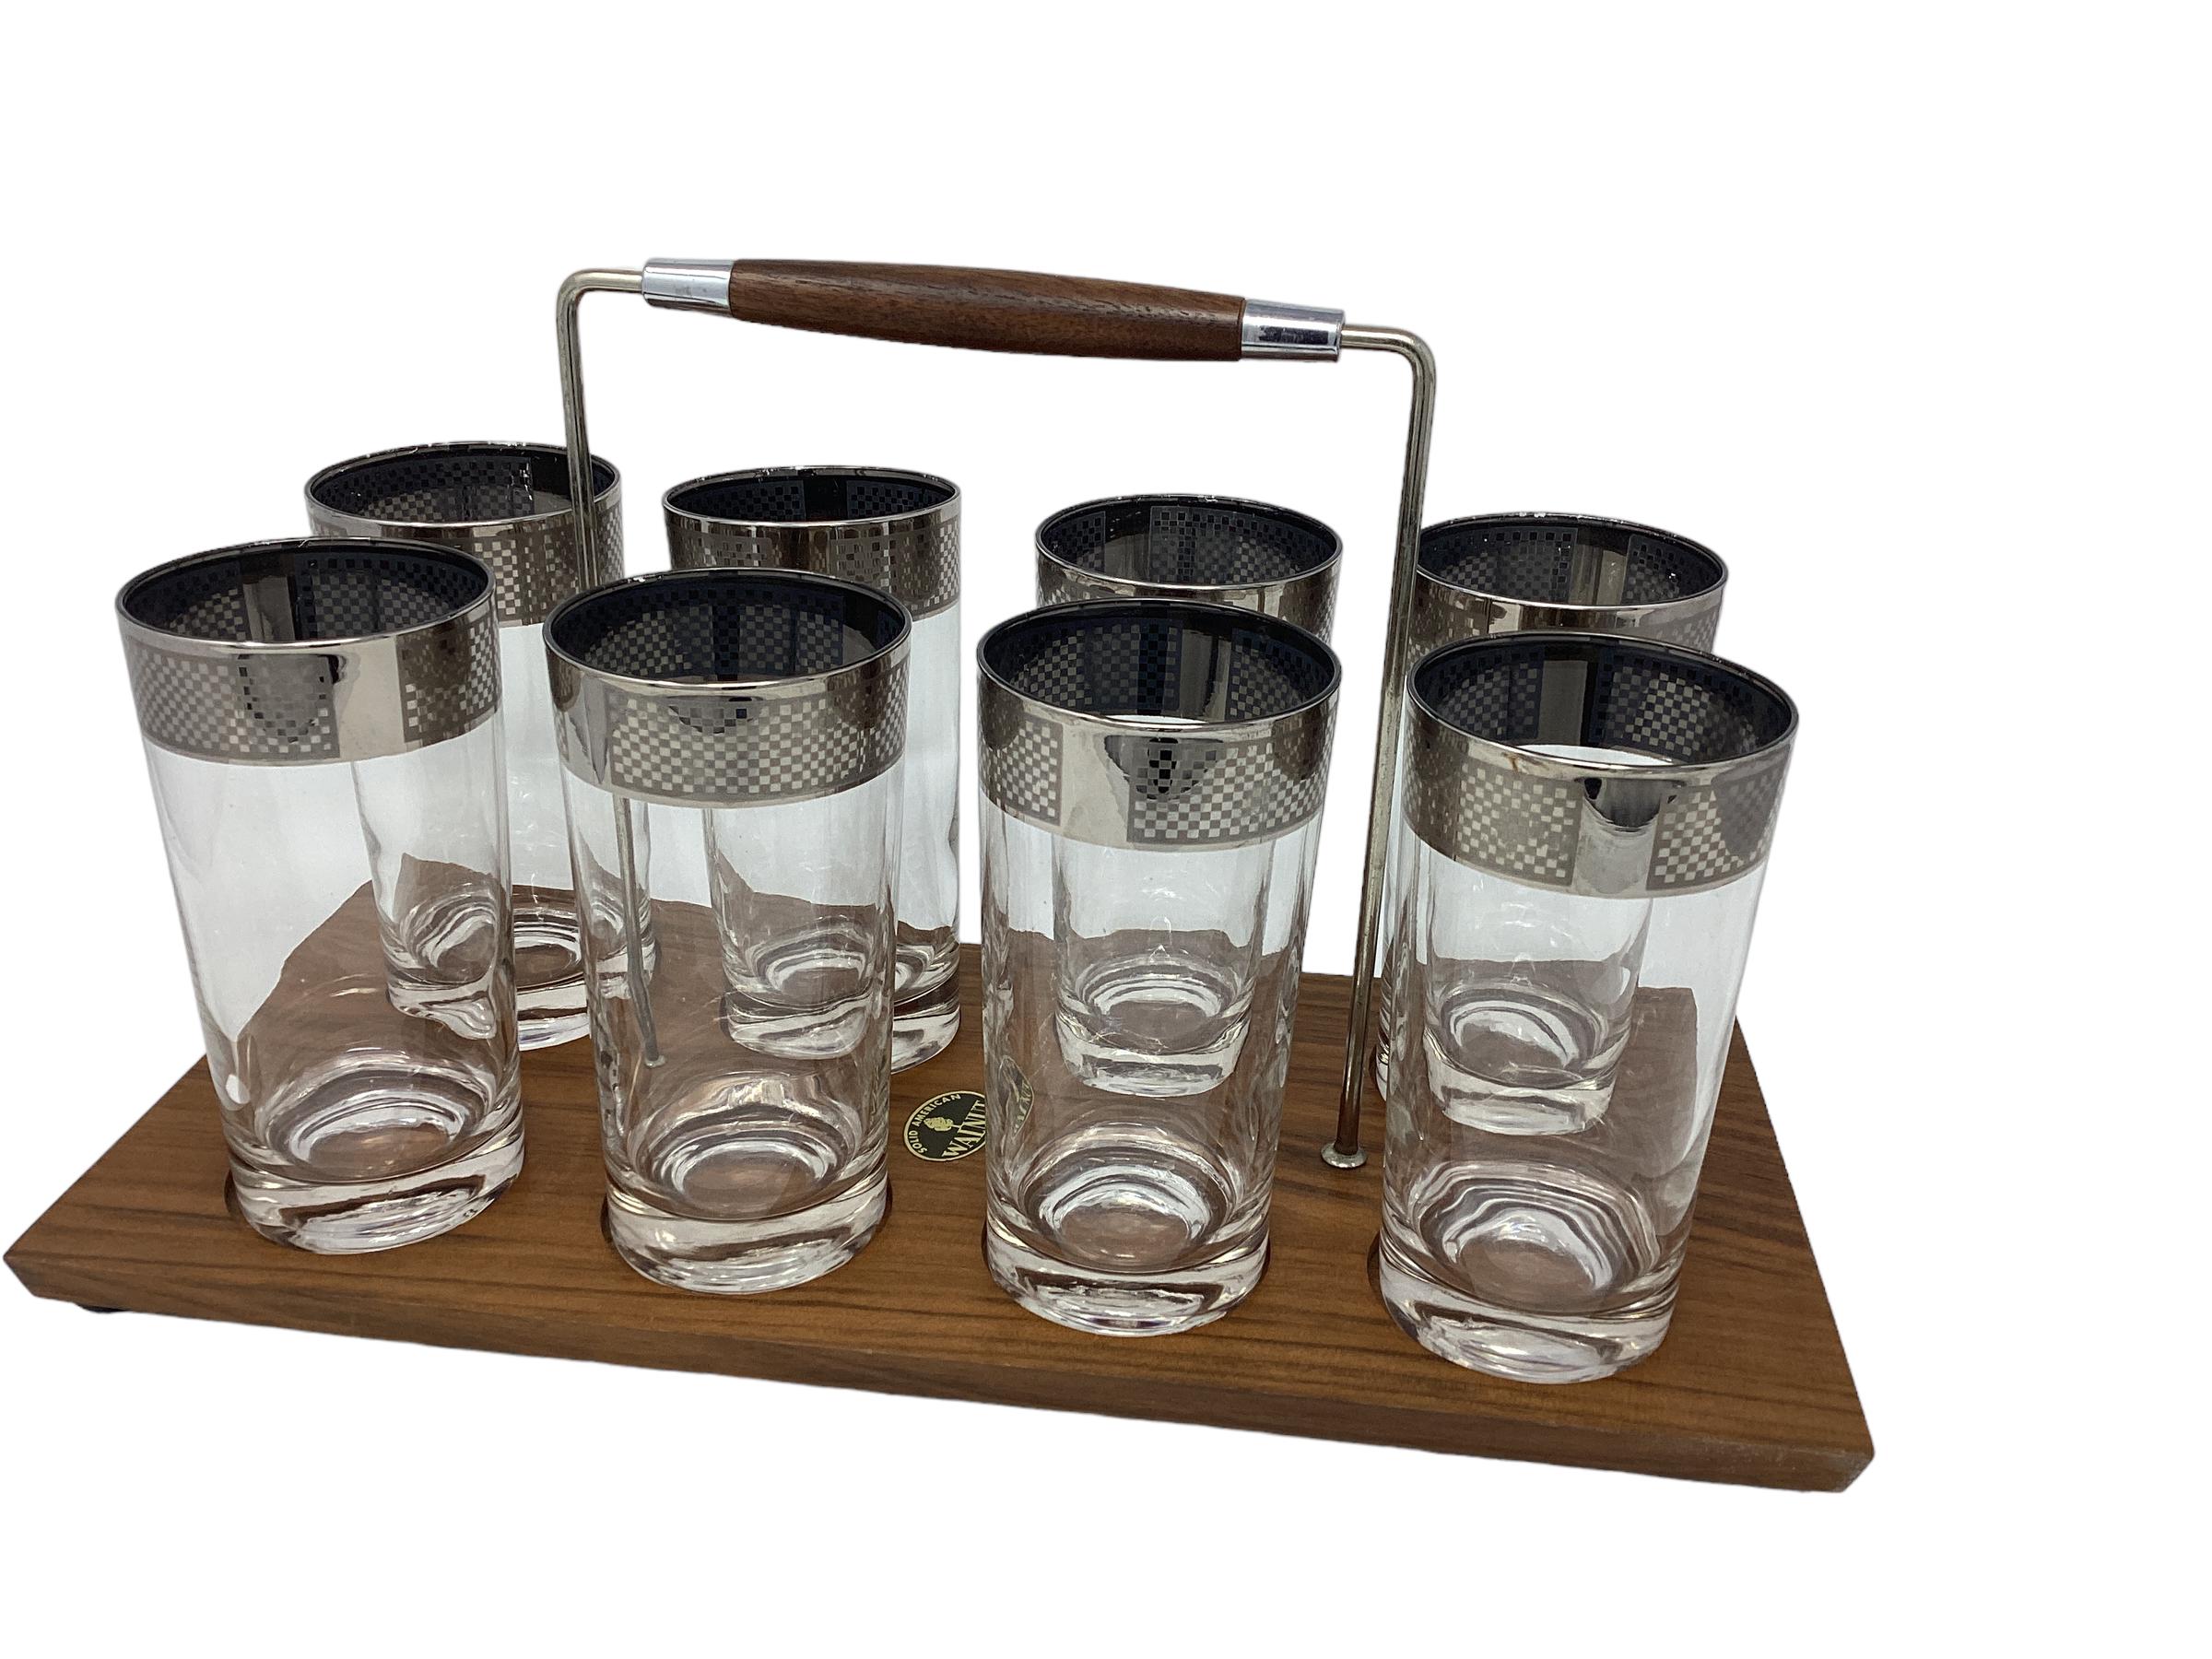 Set of 8 highball glasses. Each with a wide silver band in a checker board design. Comes with original walnut and chrome carrier.